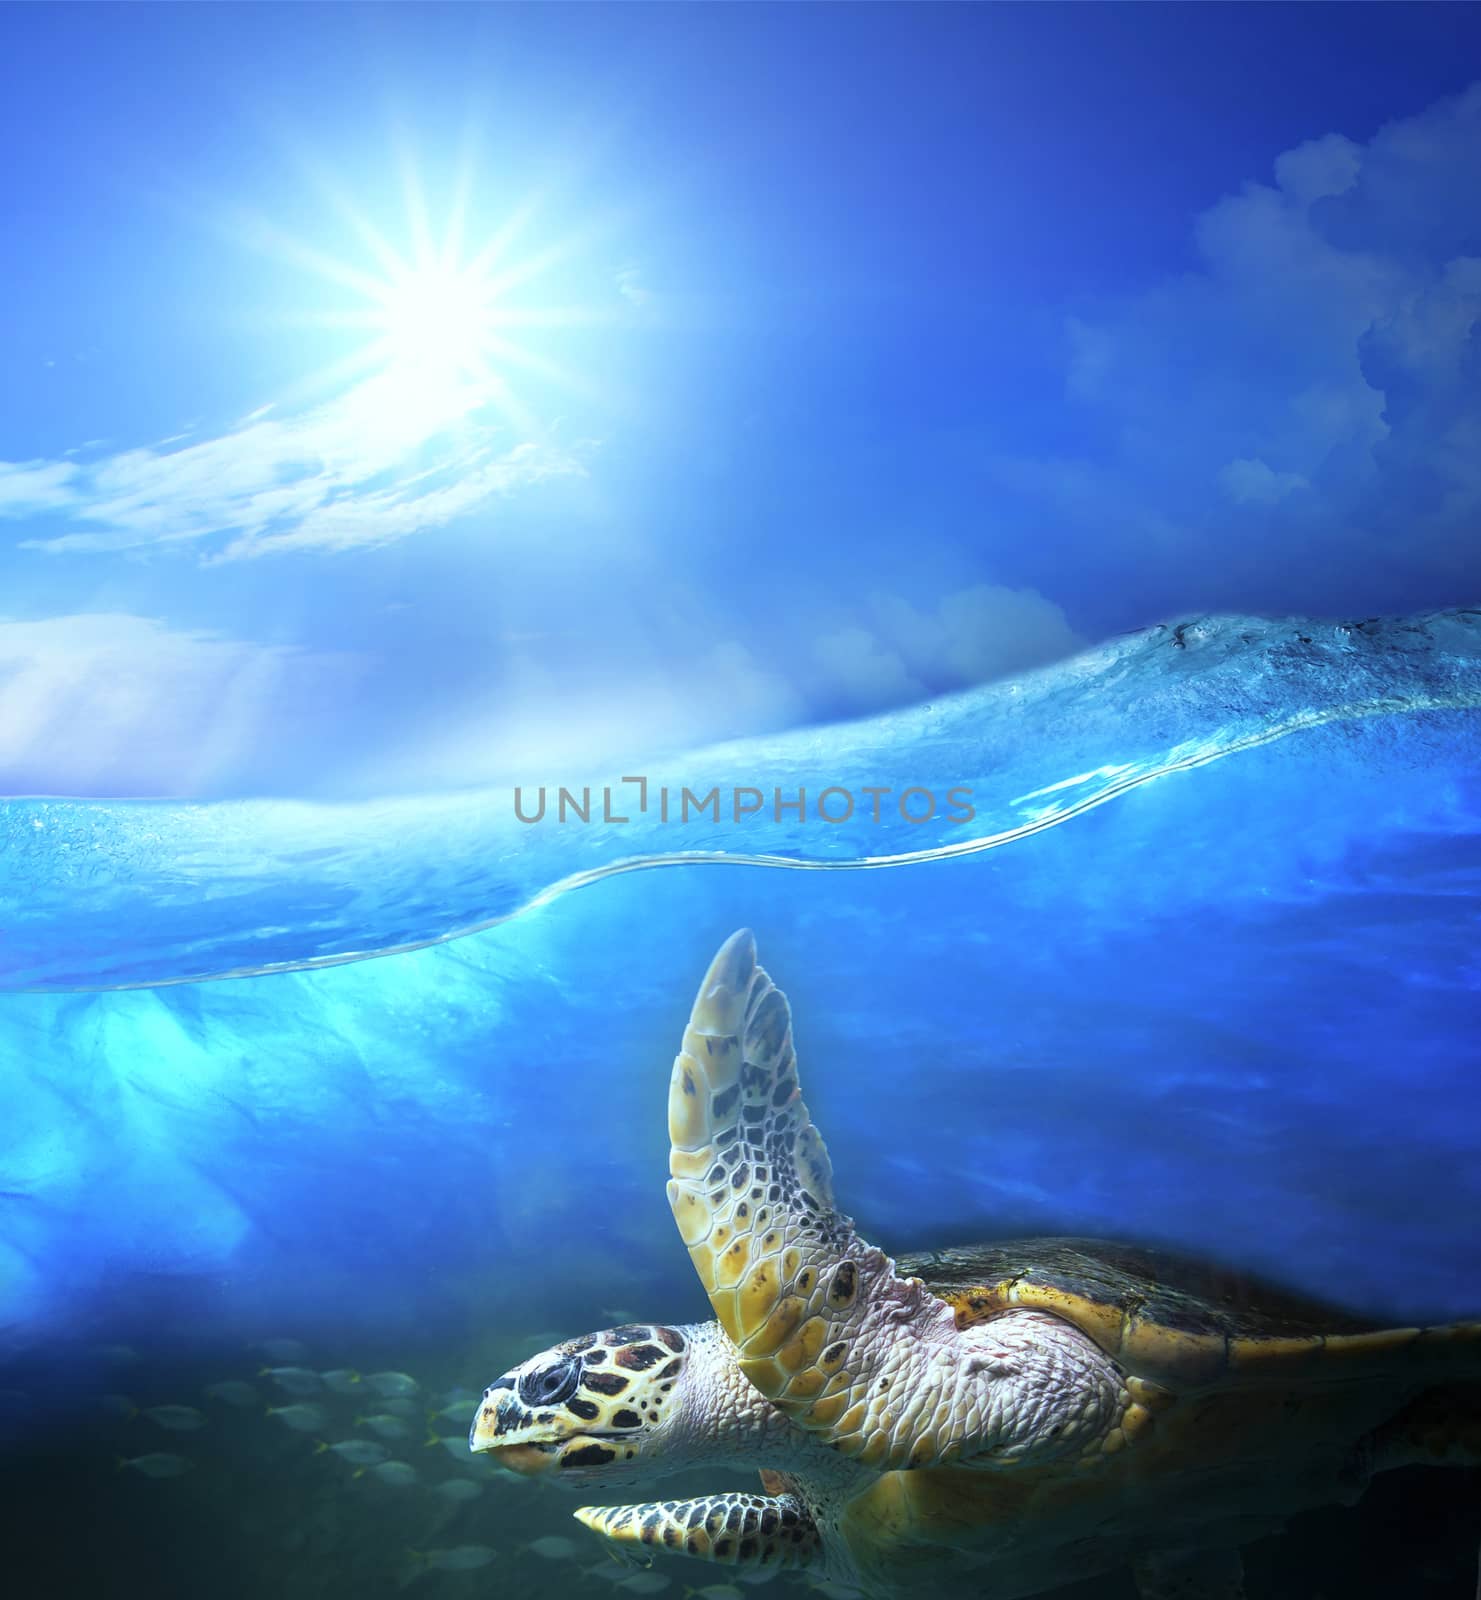 turtle swimming under clear sea blue water with sun shining on sky above use for ocean nature background 